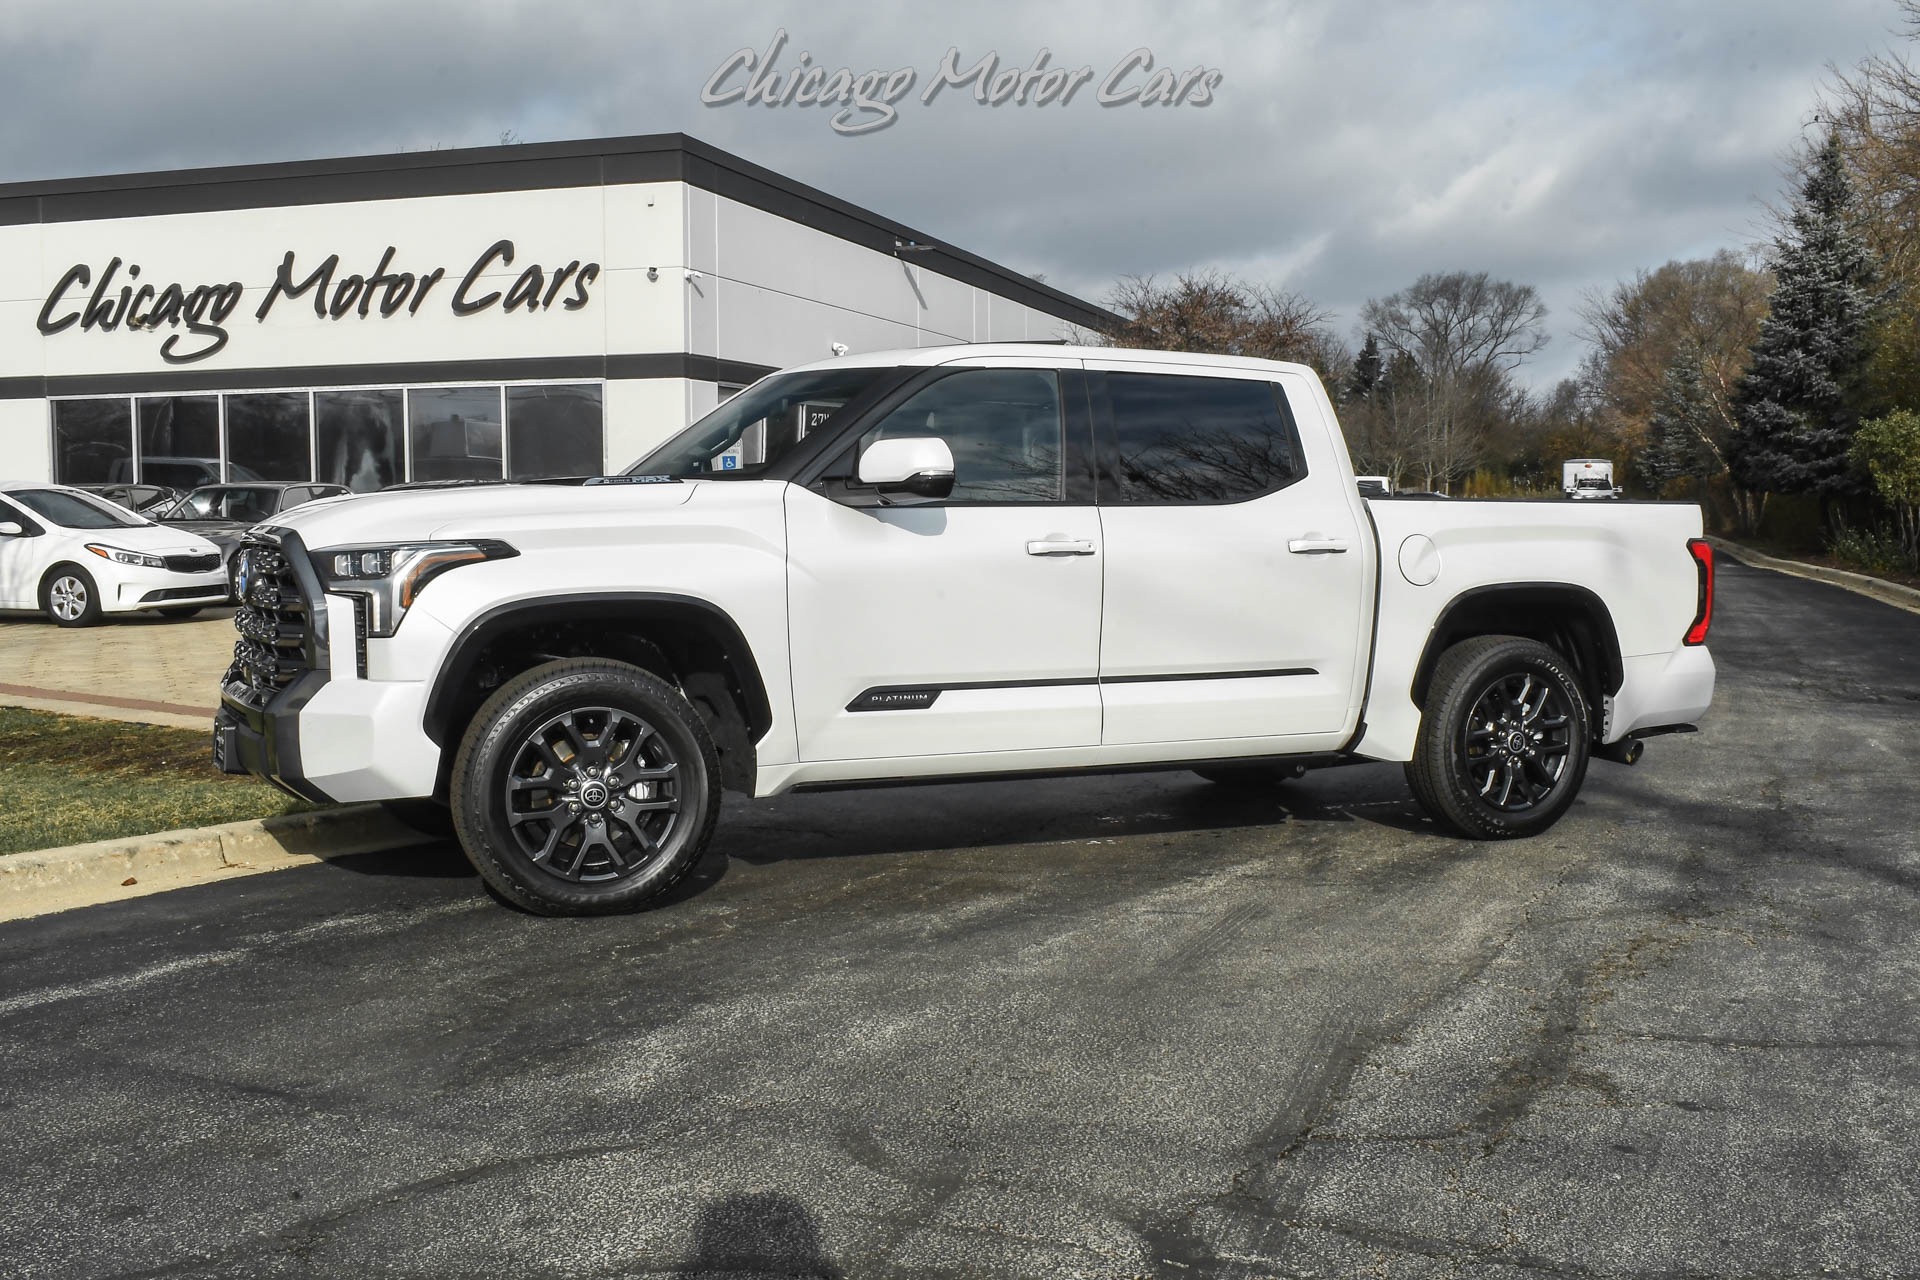 Used-2023-Toyota-Tundra-Platinum-HV-4X4-Pickup-I-FORCE-MAX-ADVANCE-Pkg-Special-Paint-LOADED